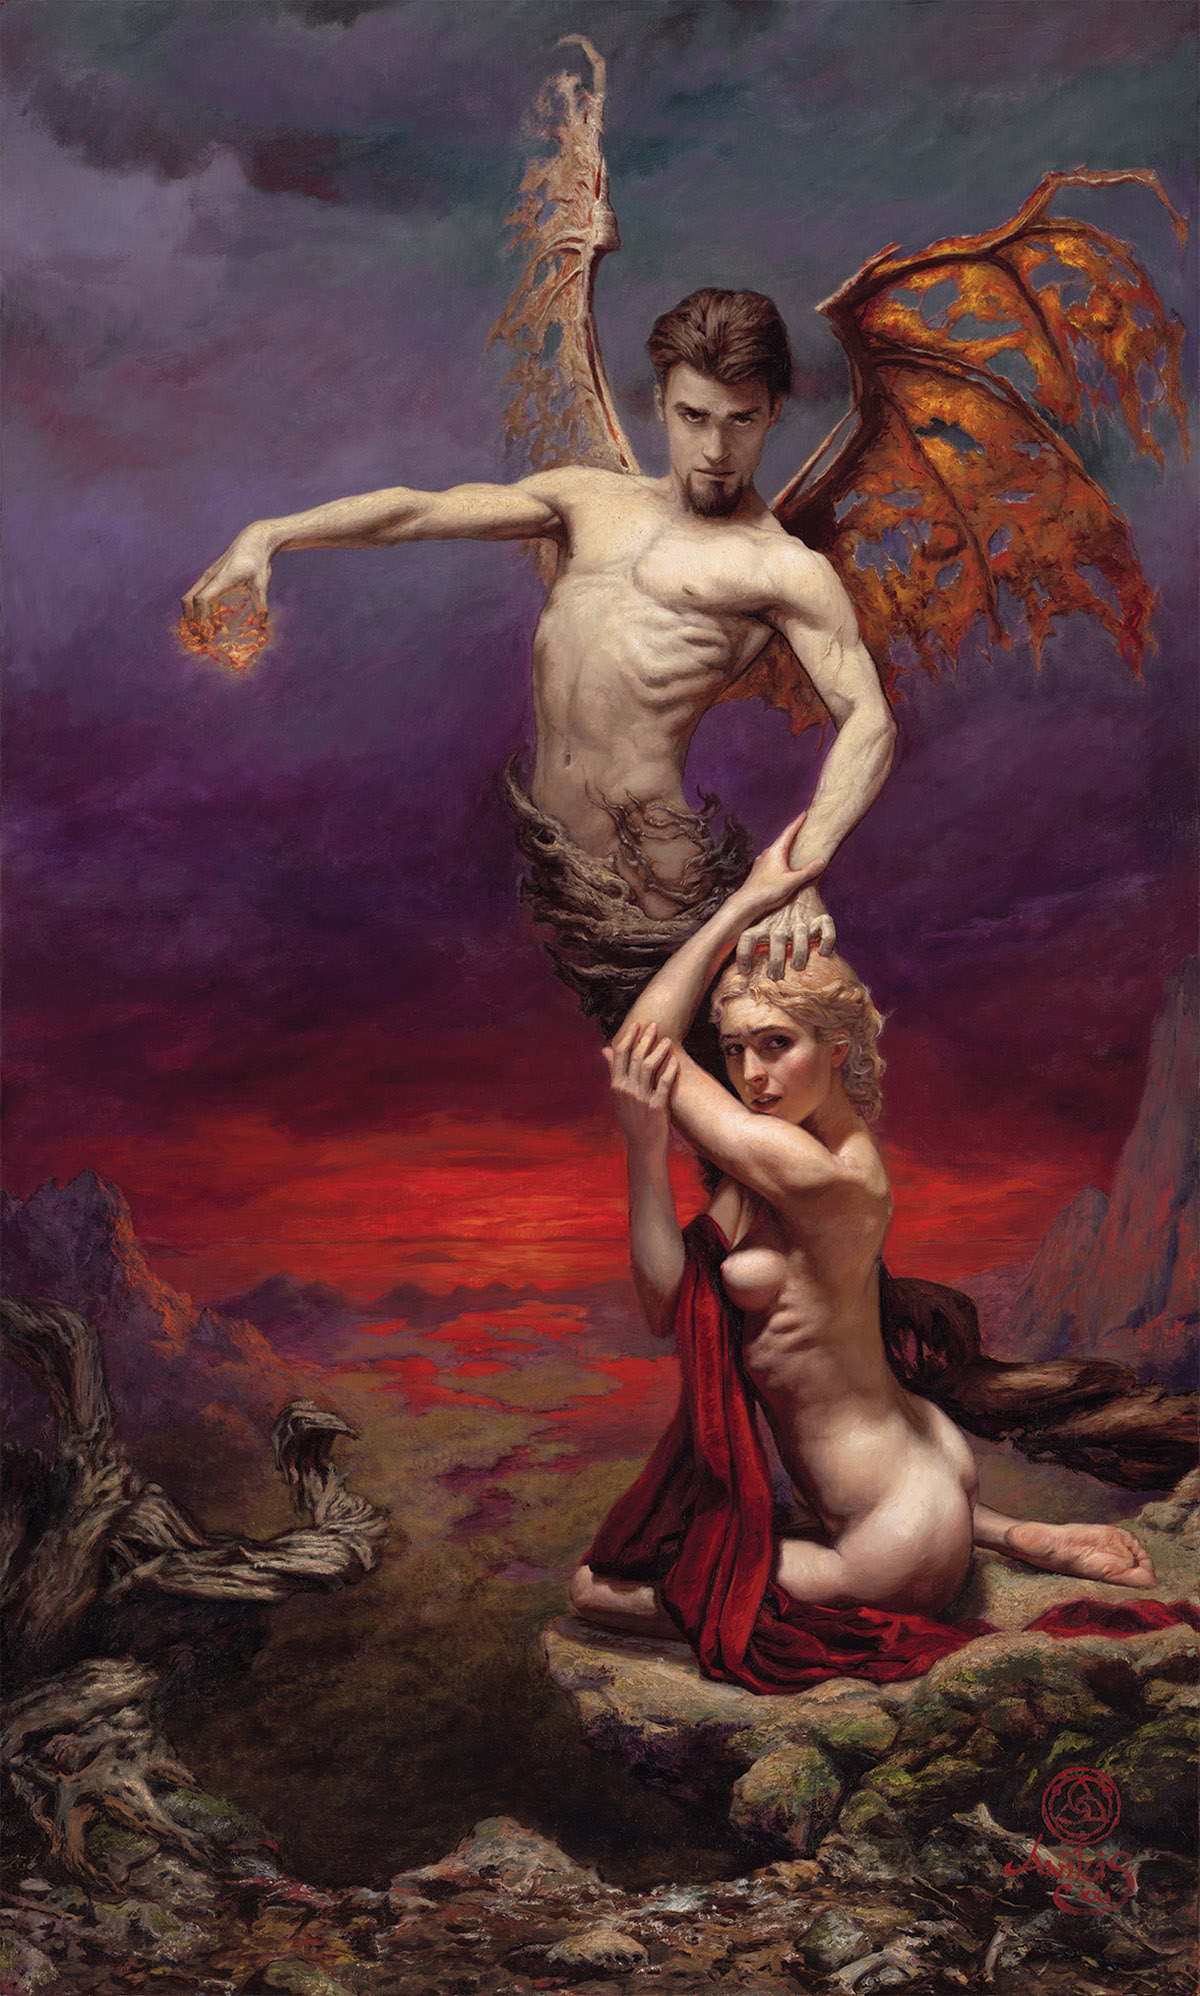 oil painting of man and woman. woman holding onto man, man has wings and holding fire ball in right hand; both nude, woman partially covered with red drapery